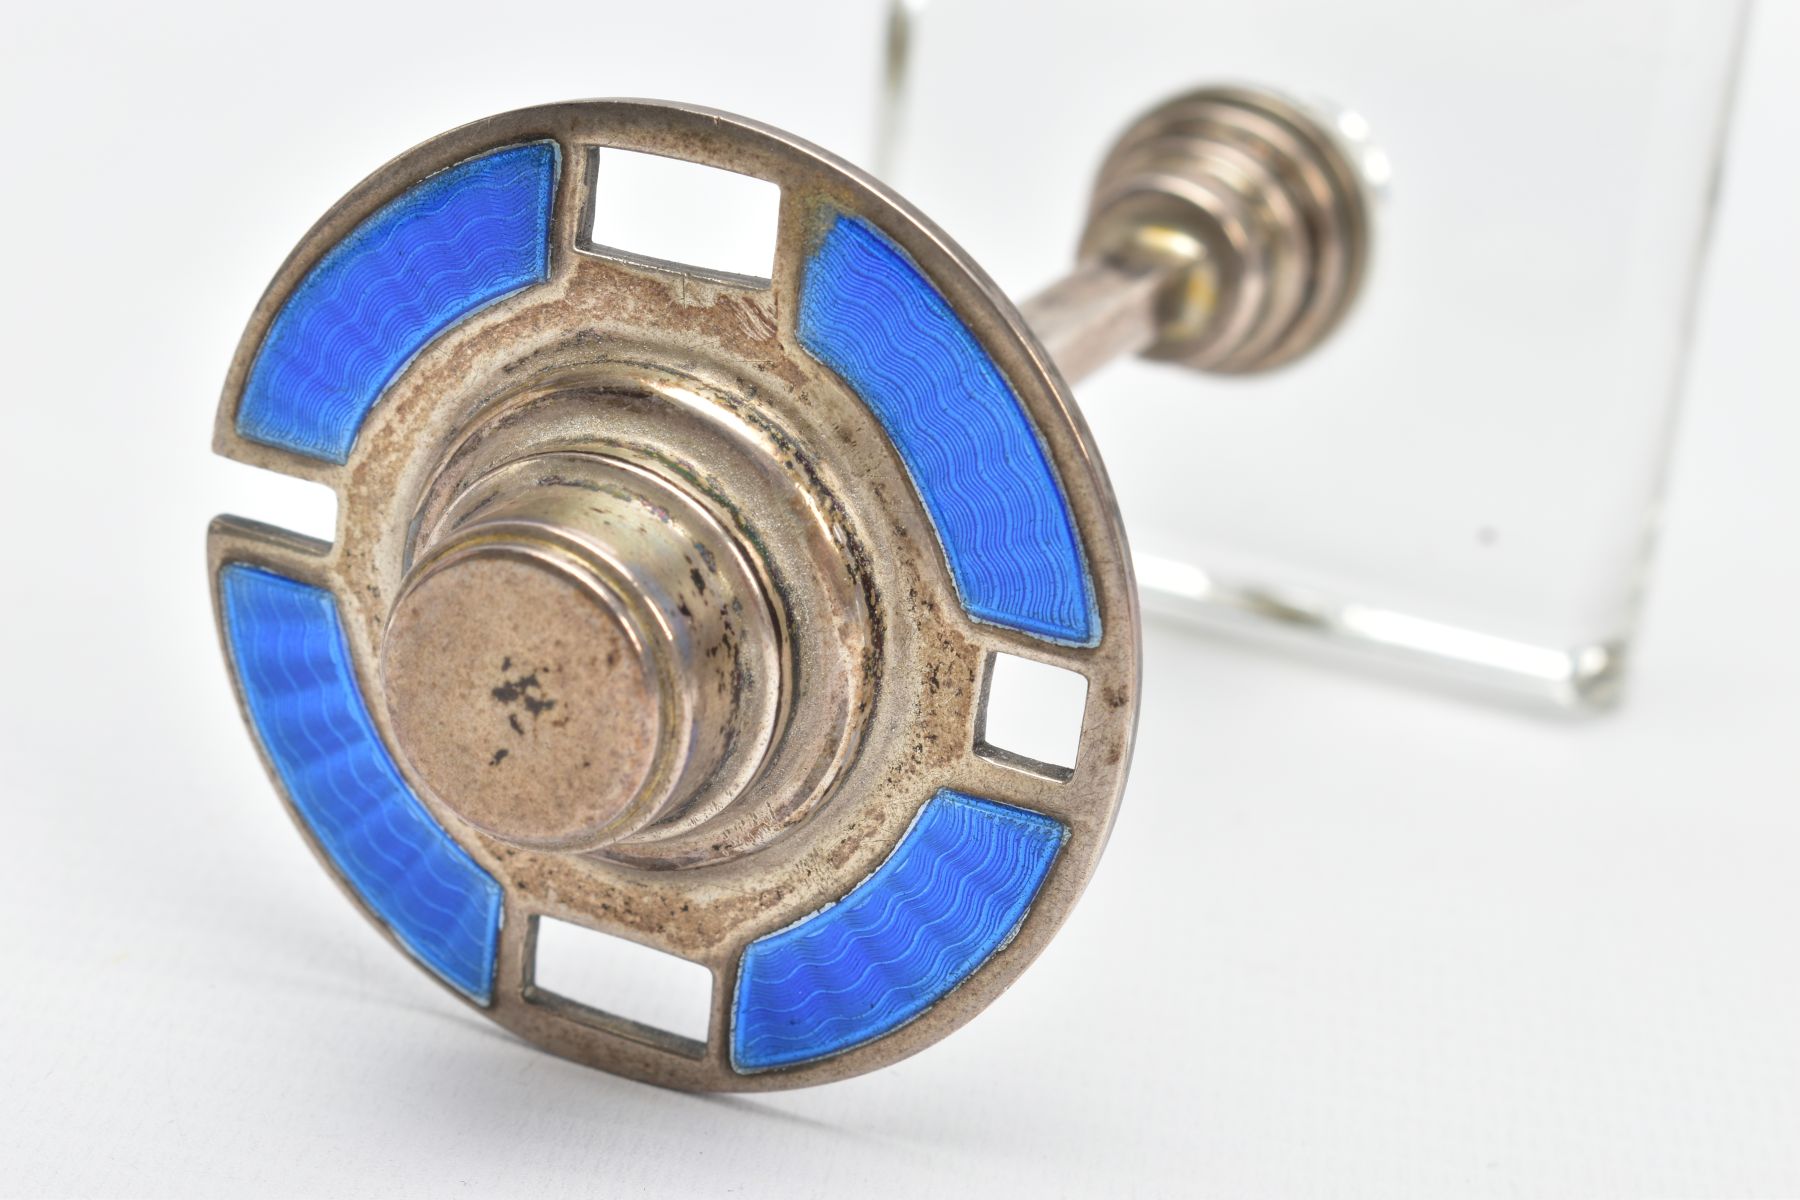 A 1930S SILVER ENAMEL MANICURE STAND, a circular silver stand with blue guilloche enamel detail - Image 7 of 9